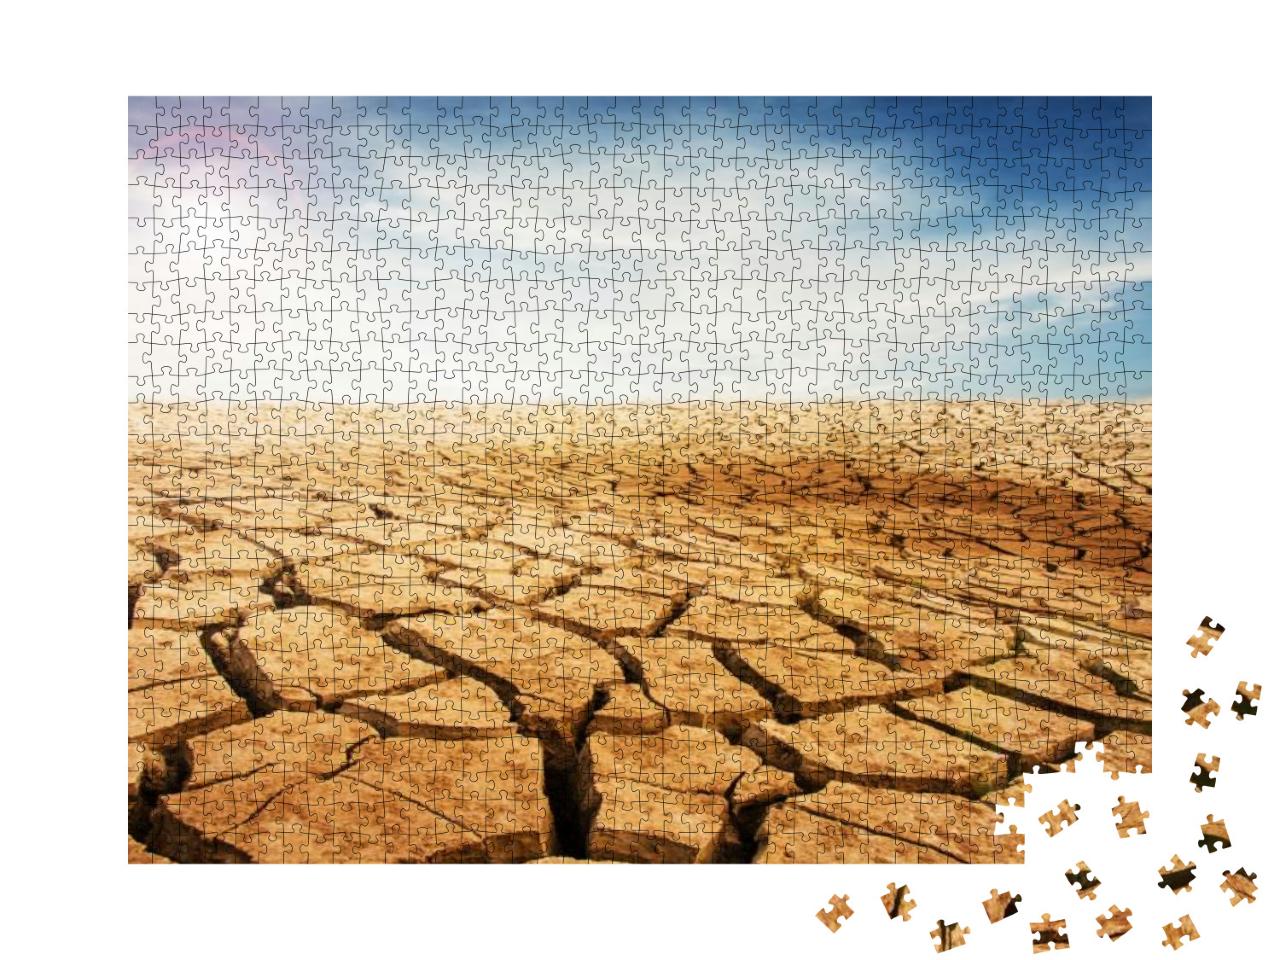 Desert Dry & Cracked Ground... Jigsaw Puzzle with 1000 pieces